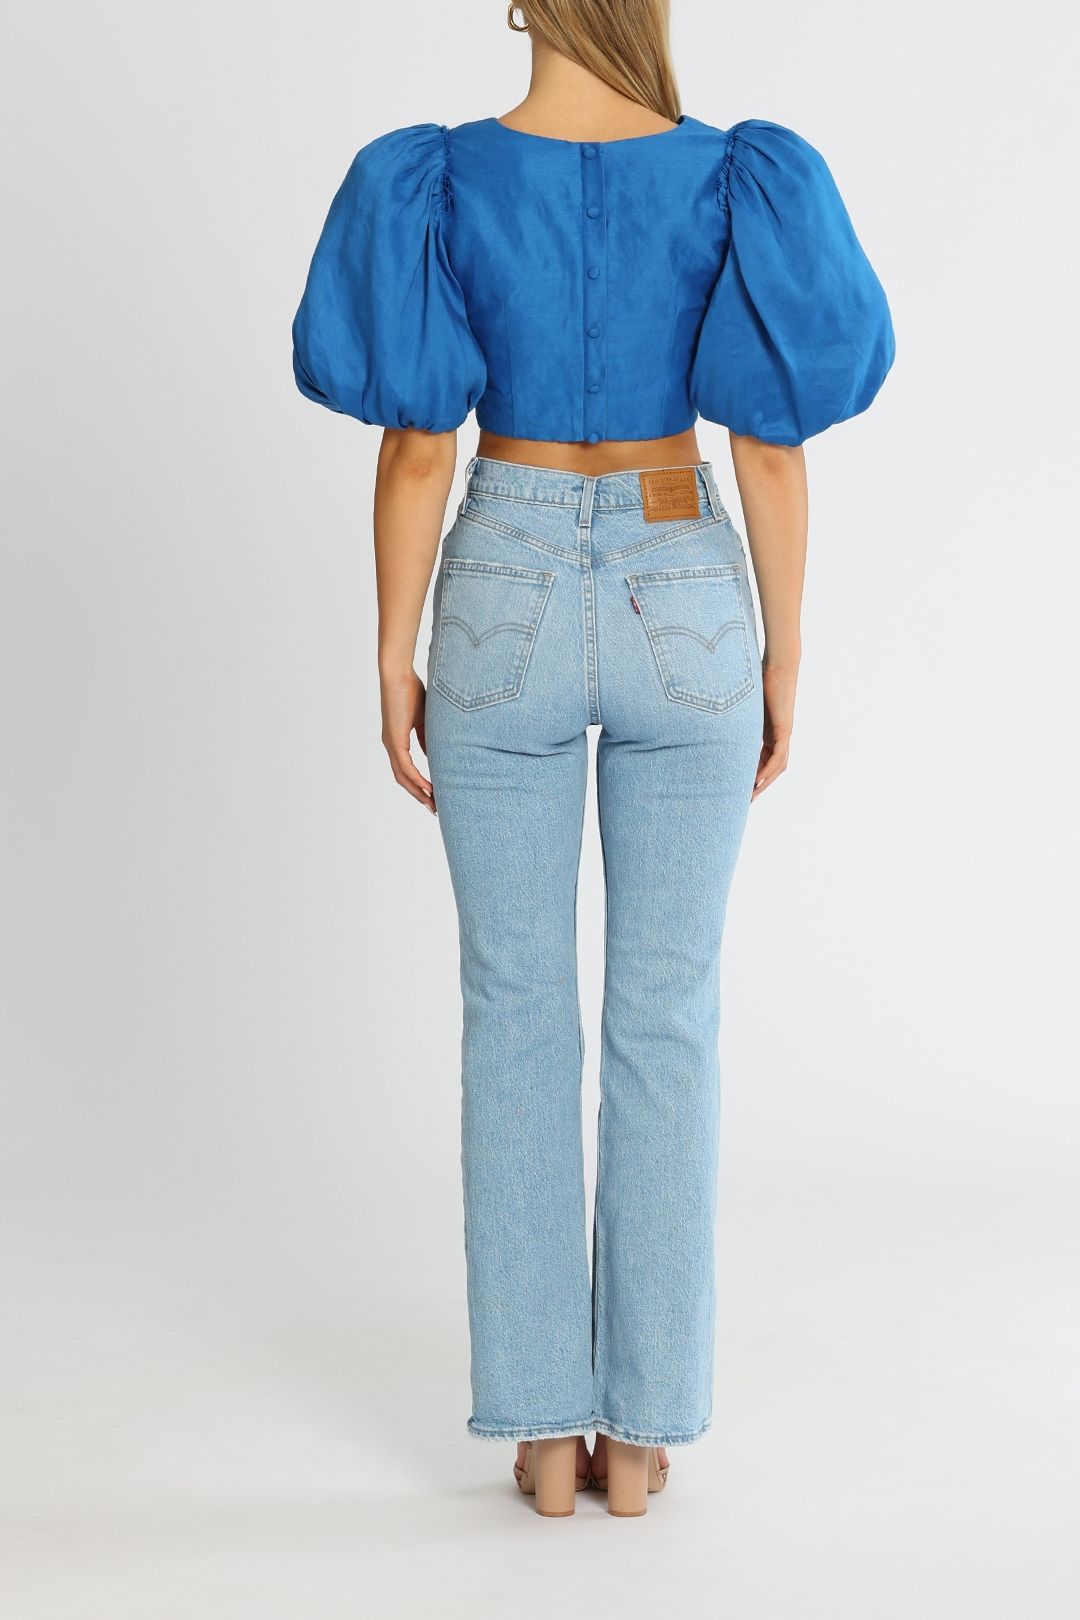 AJE Reverb Puff Sleeve Cropped Top Cobalt Blue Button Closure